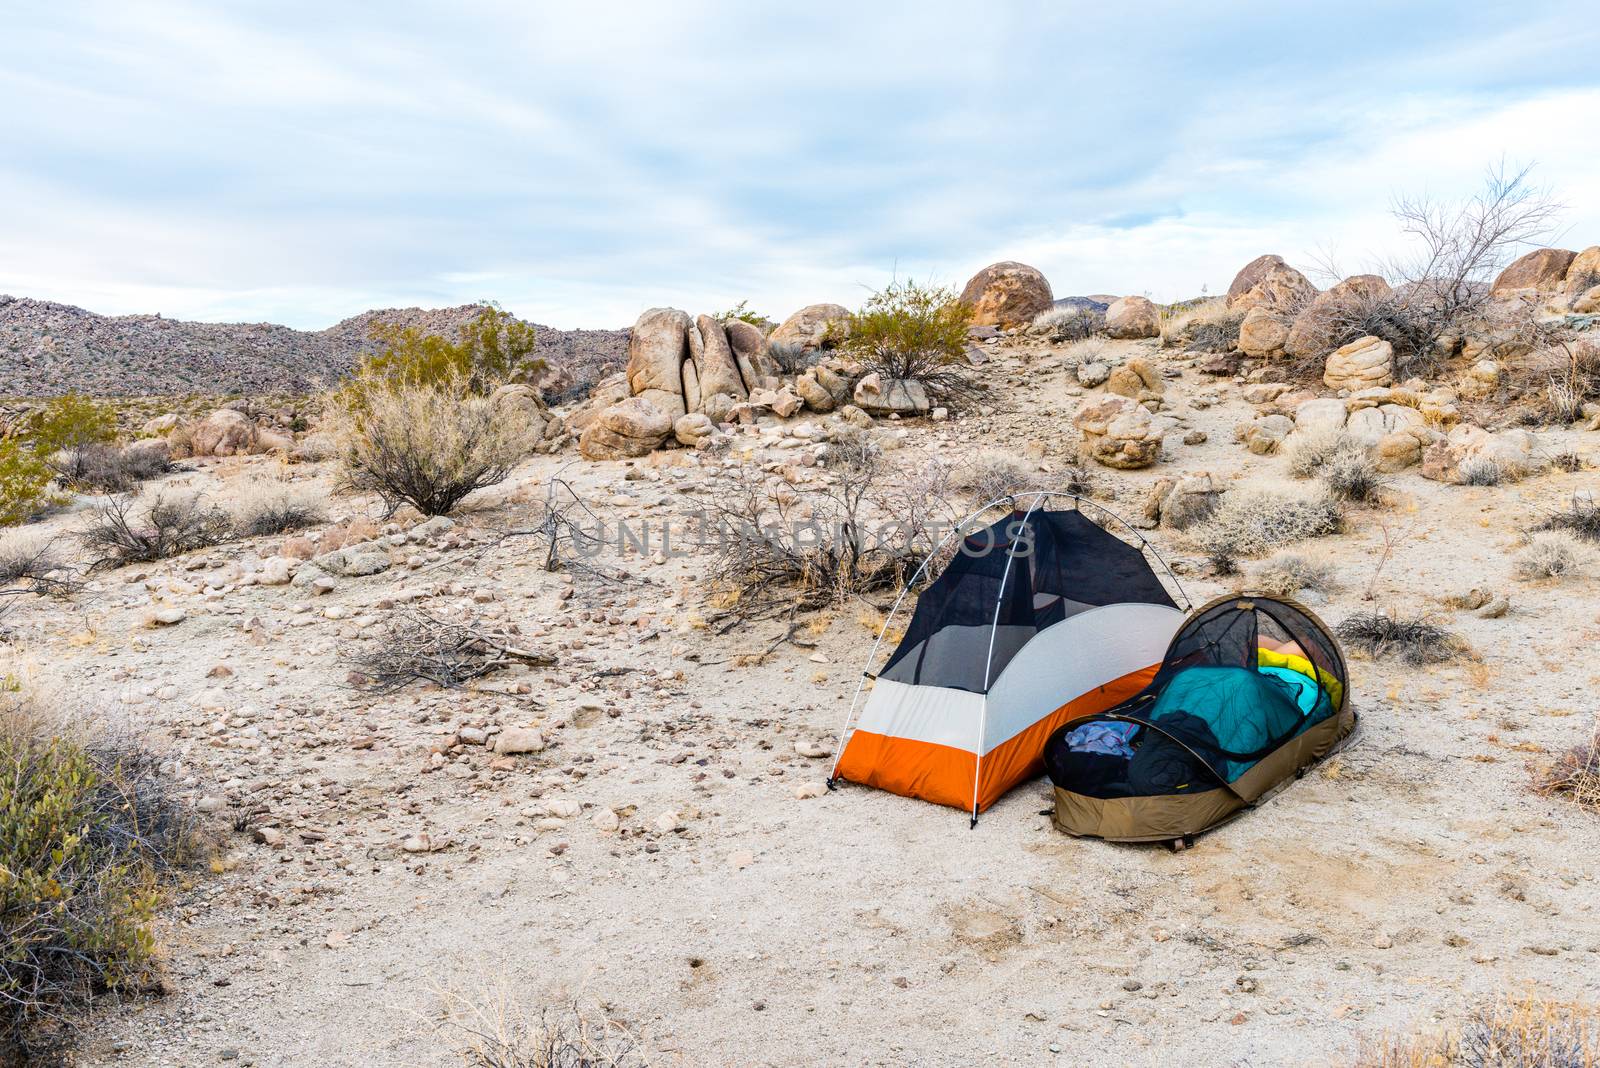 Backpacking tents in the Porcupine Wash wilderness area in Joshua Tree National Park, California